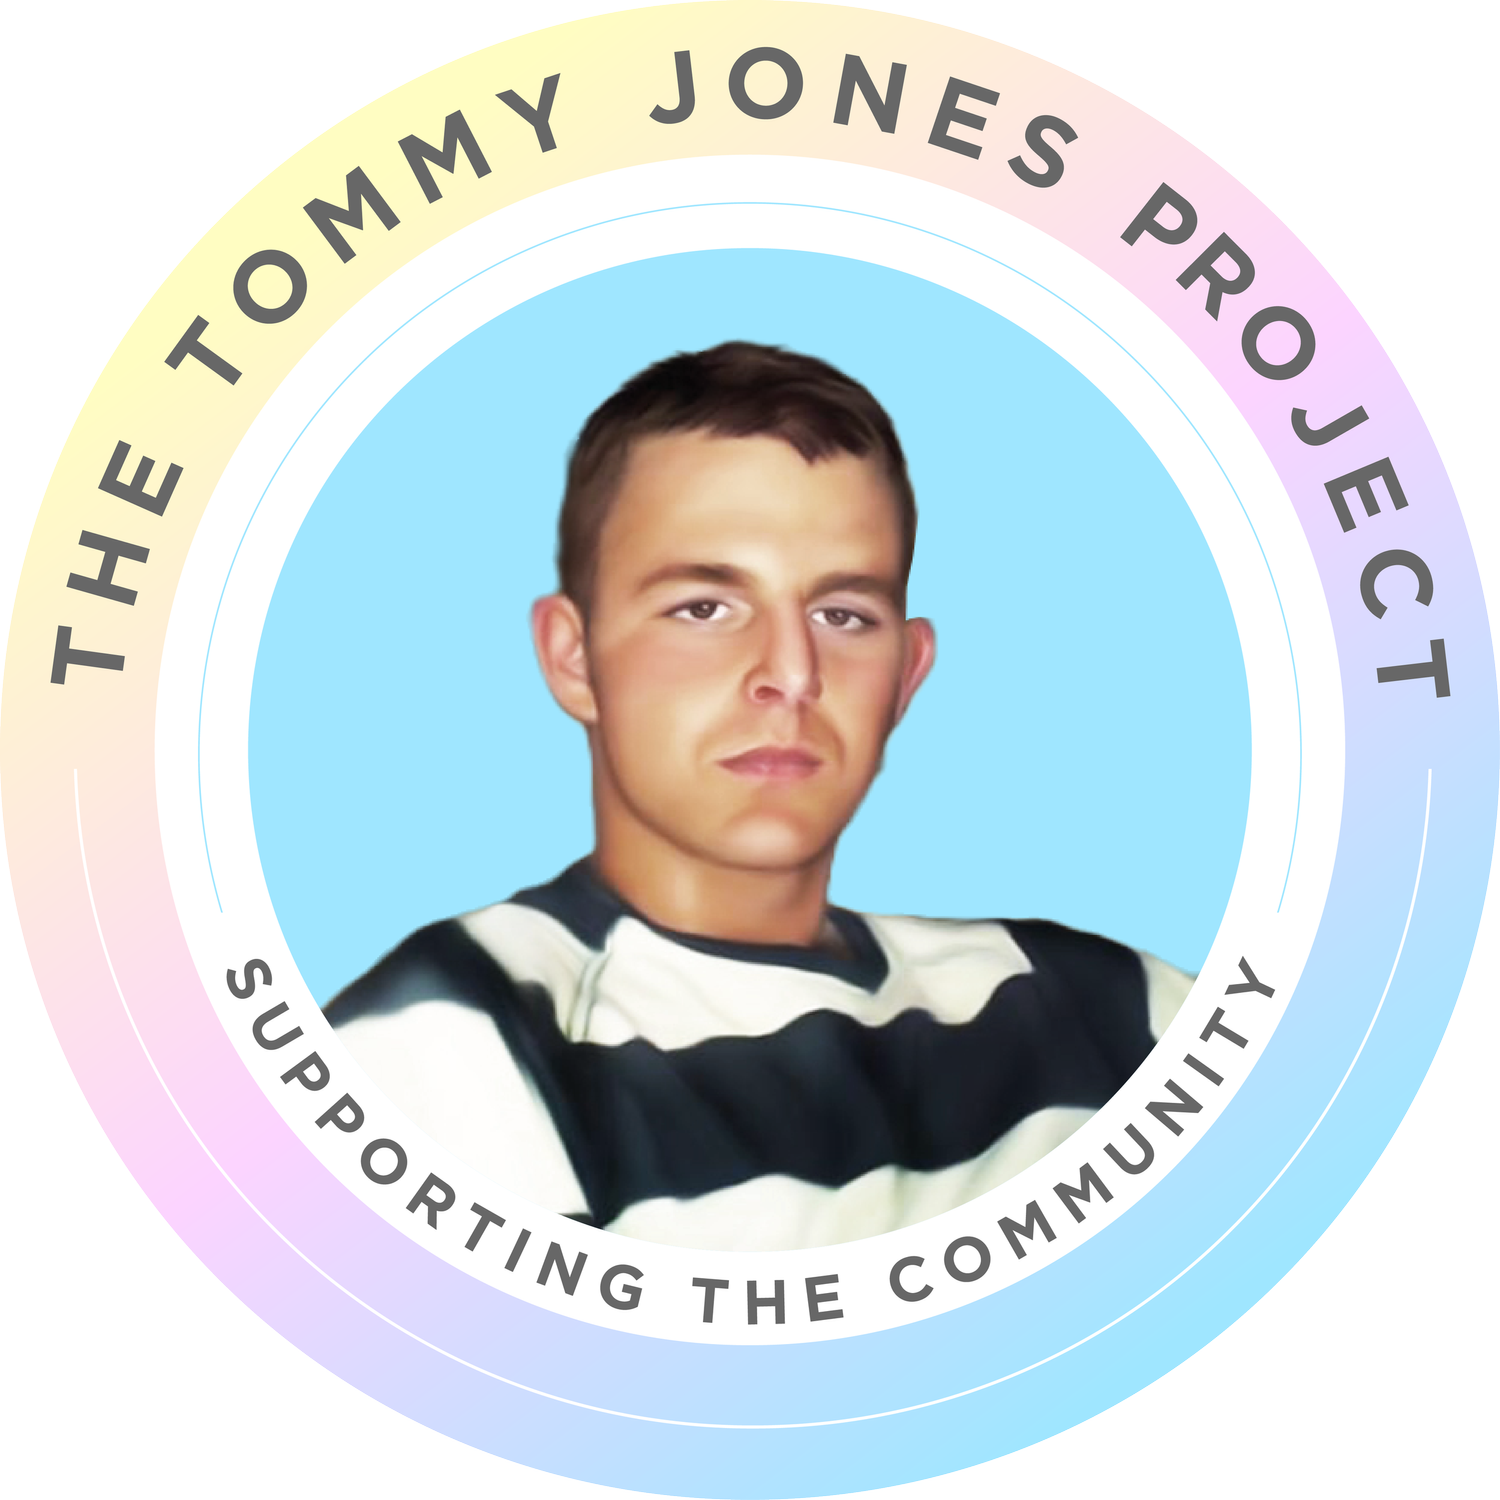 The Tommy Jones Project